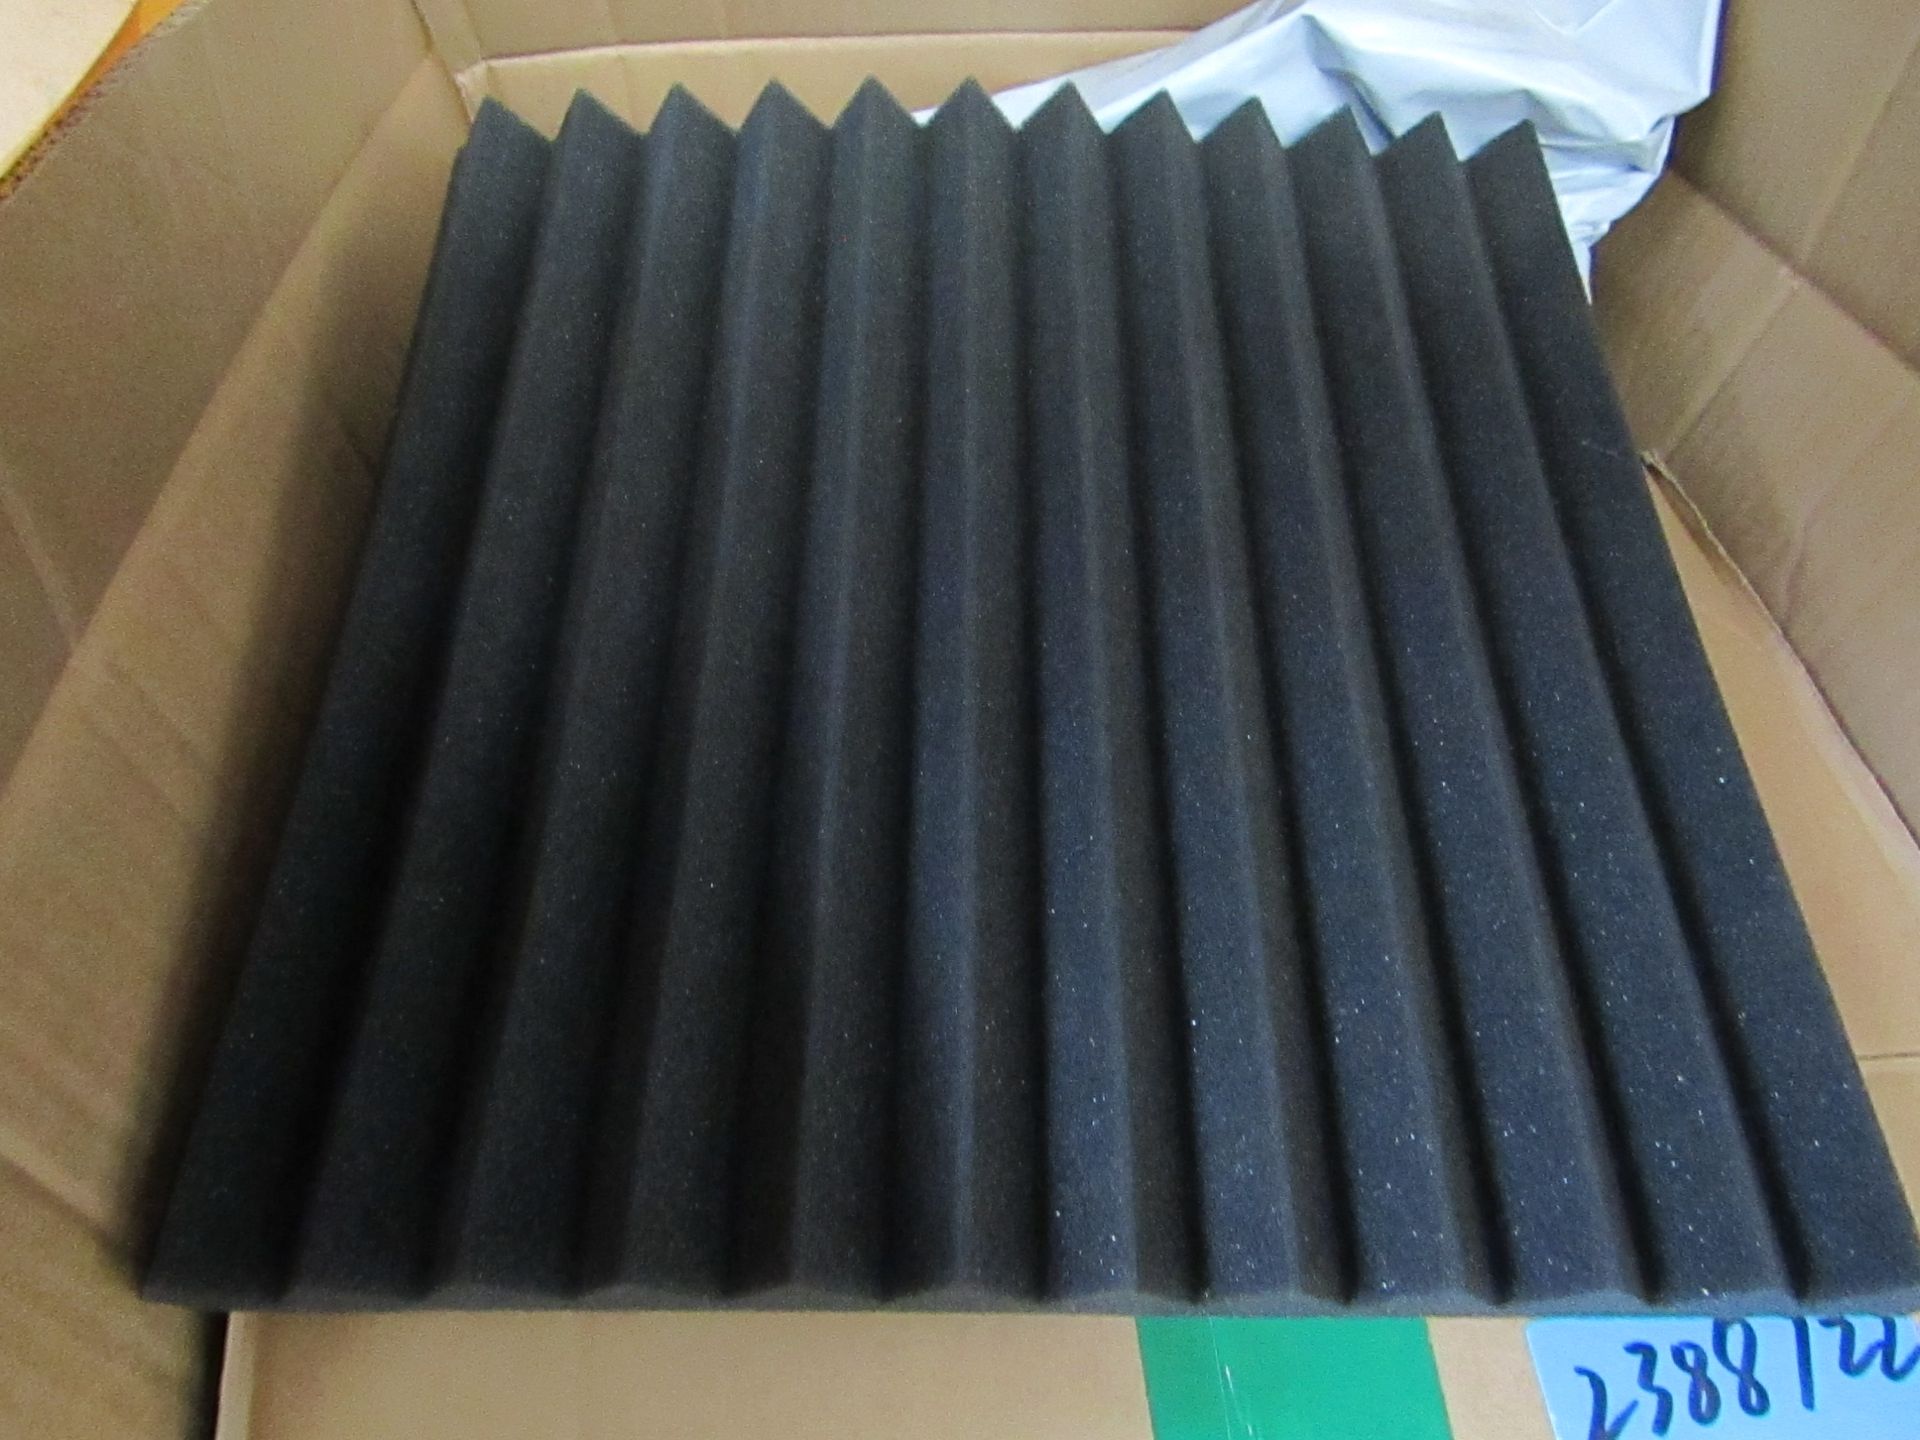 4x Packs Containing 10 Units Per Pack Being : Unbranded - Acousic Foam Tiles - Black - All